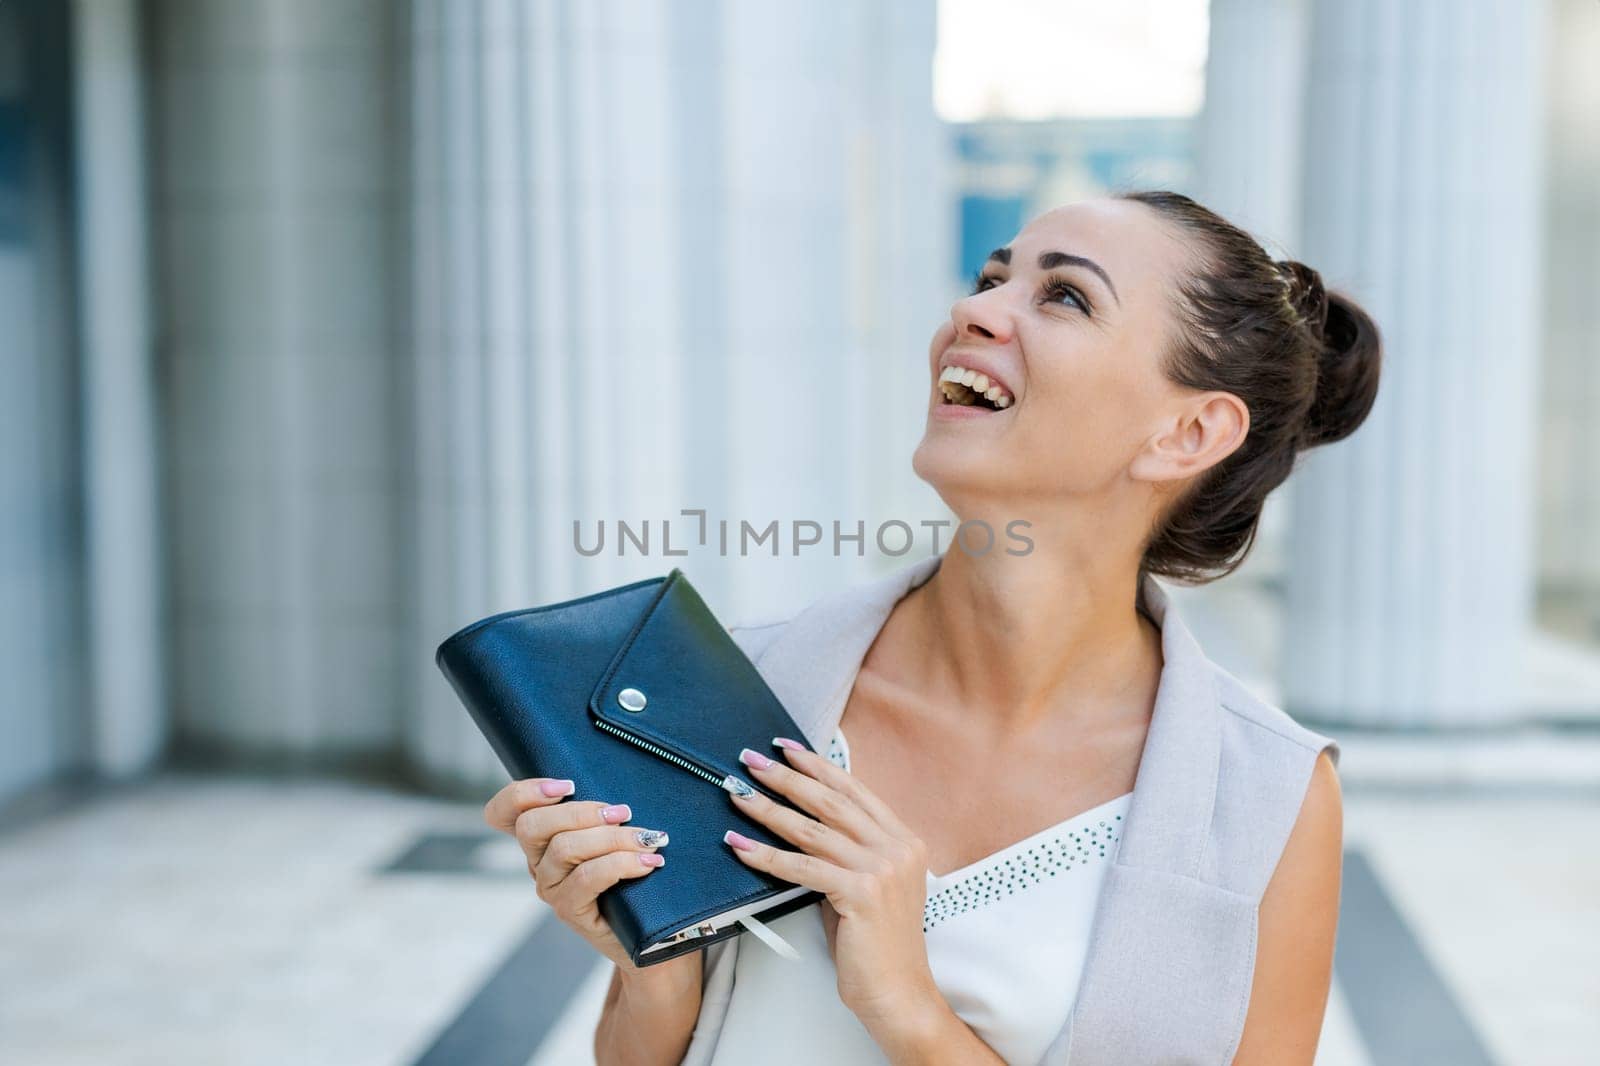 Successful businessman or entrepreneur smiling holding notepad while walking outdoor. City business woman working.